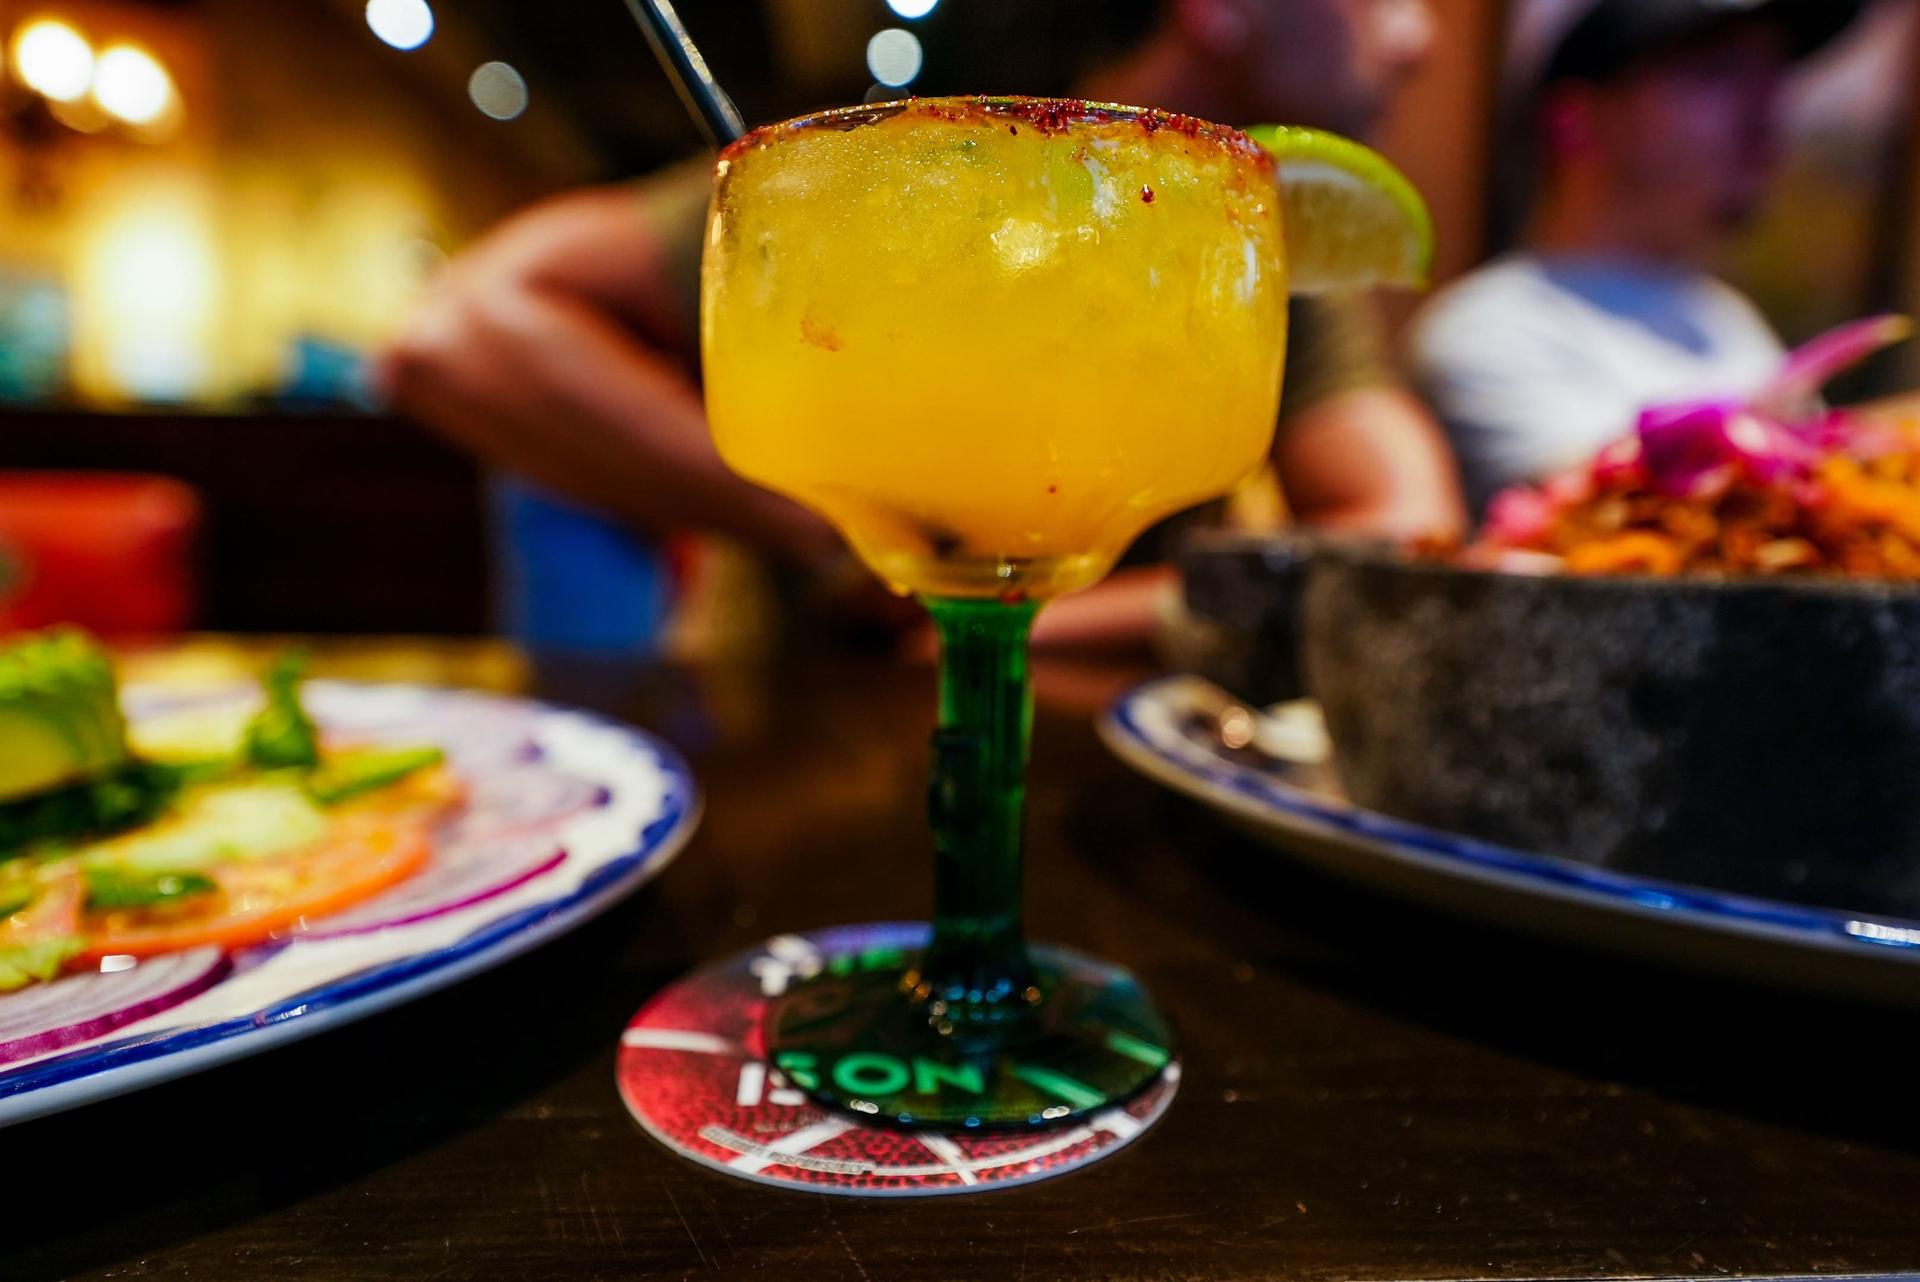 MARGARITA MONDAYS all day! Join us for small house margaritas all day at $6.99 !